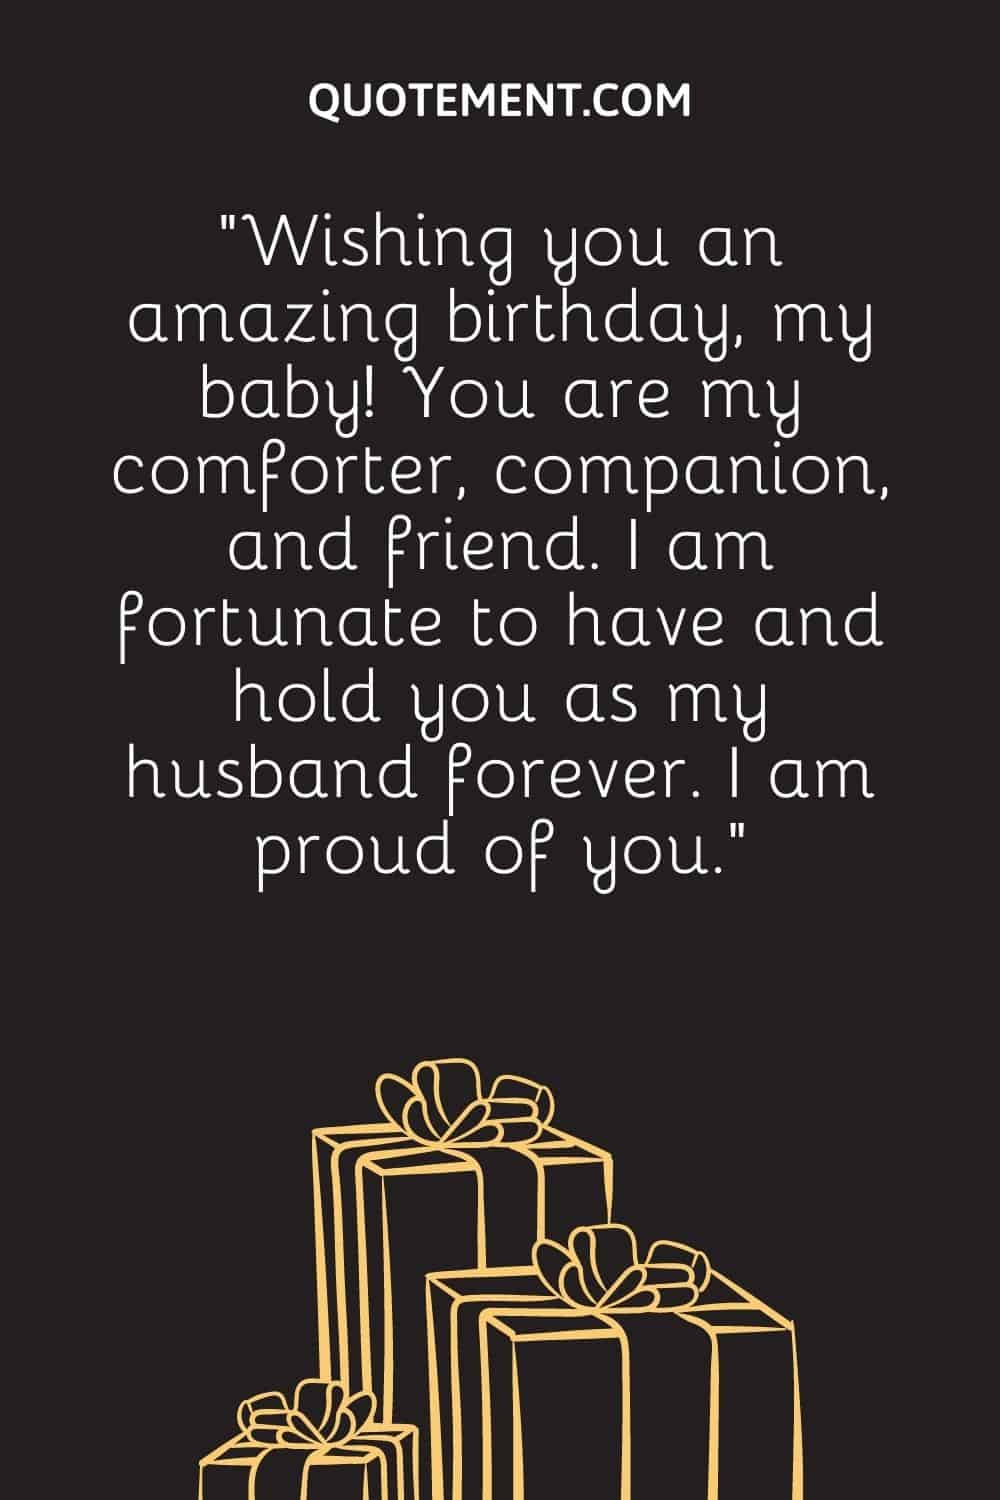 “Wishing you an amazing birthday, my baby! You are my comforter, companion, and friend. I am fortunate to have and hold you as my husband forever. I am proud of you.”